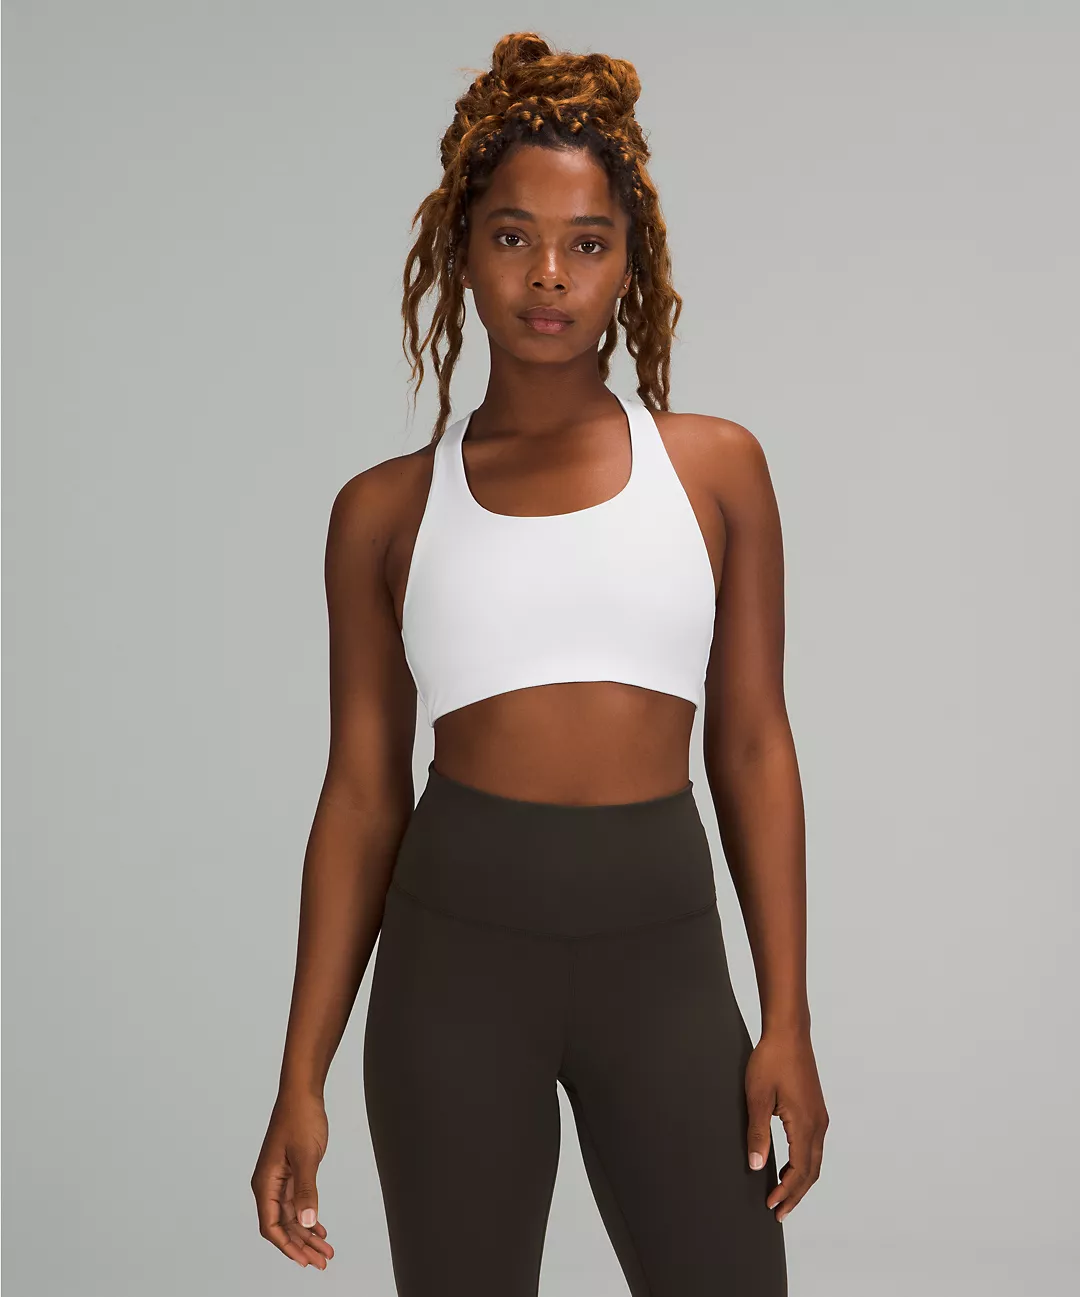 A lululemon Invigorate Bra with Clasp
High Support, B/C Cup